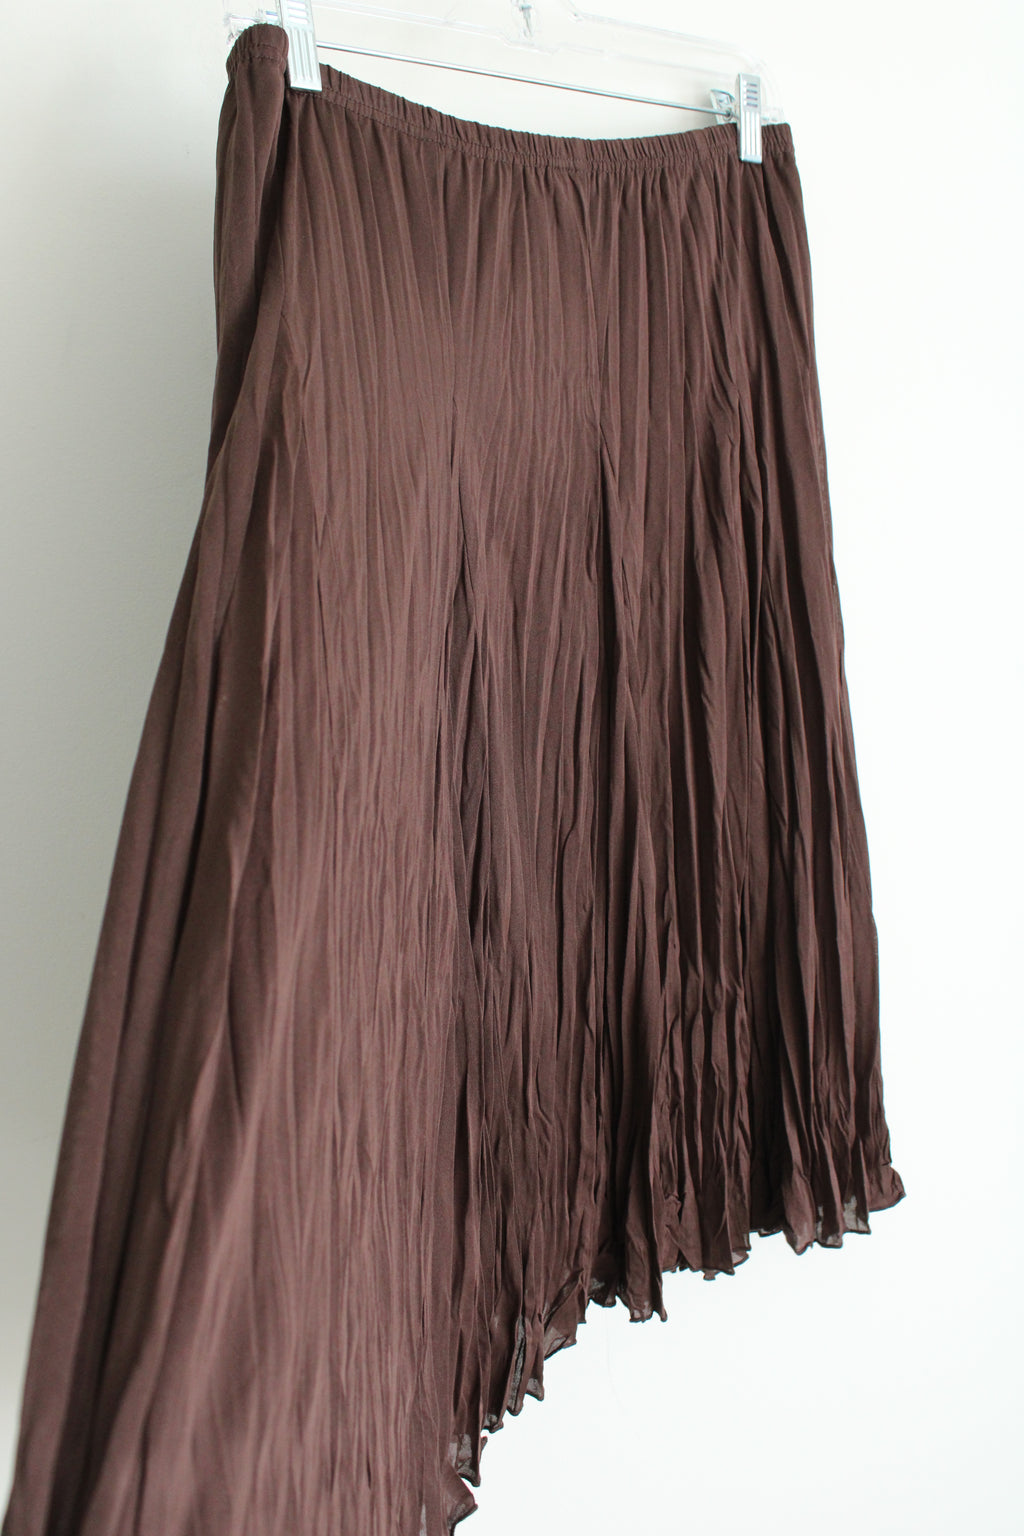 Larry Levine Brown Pleated Skirt | S